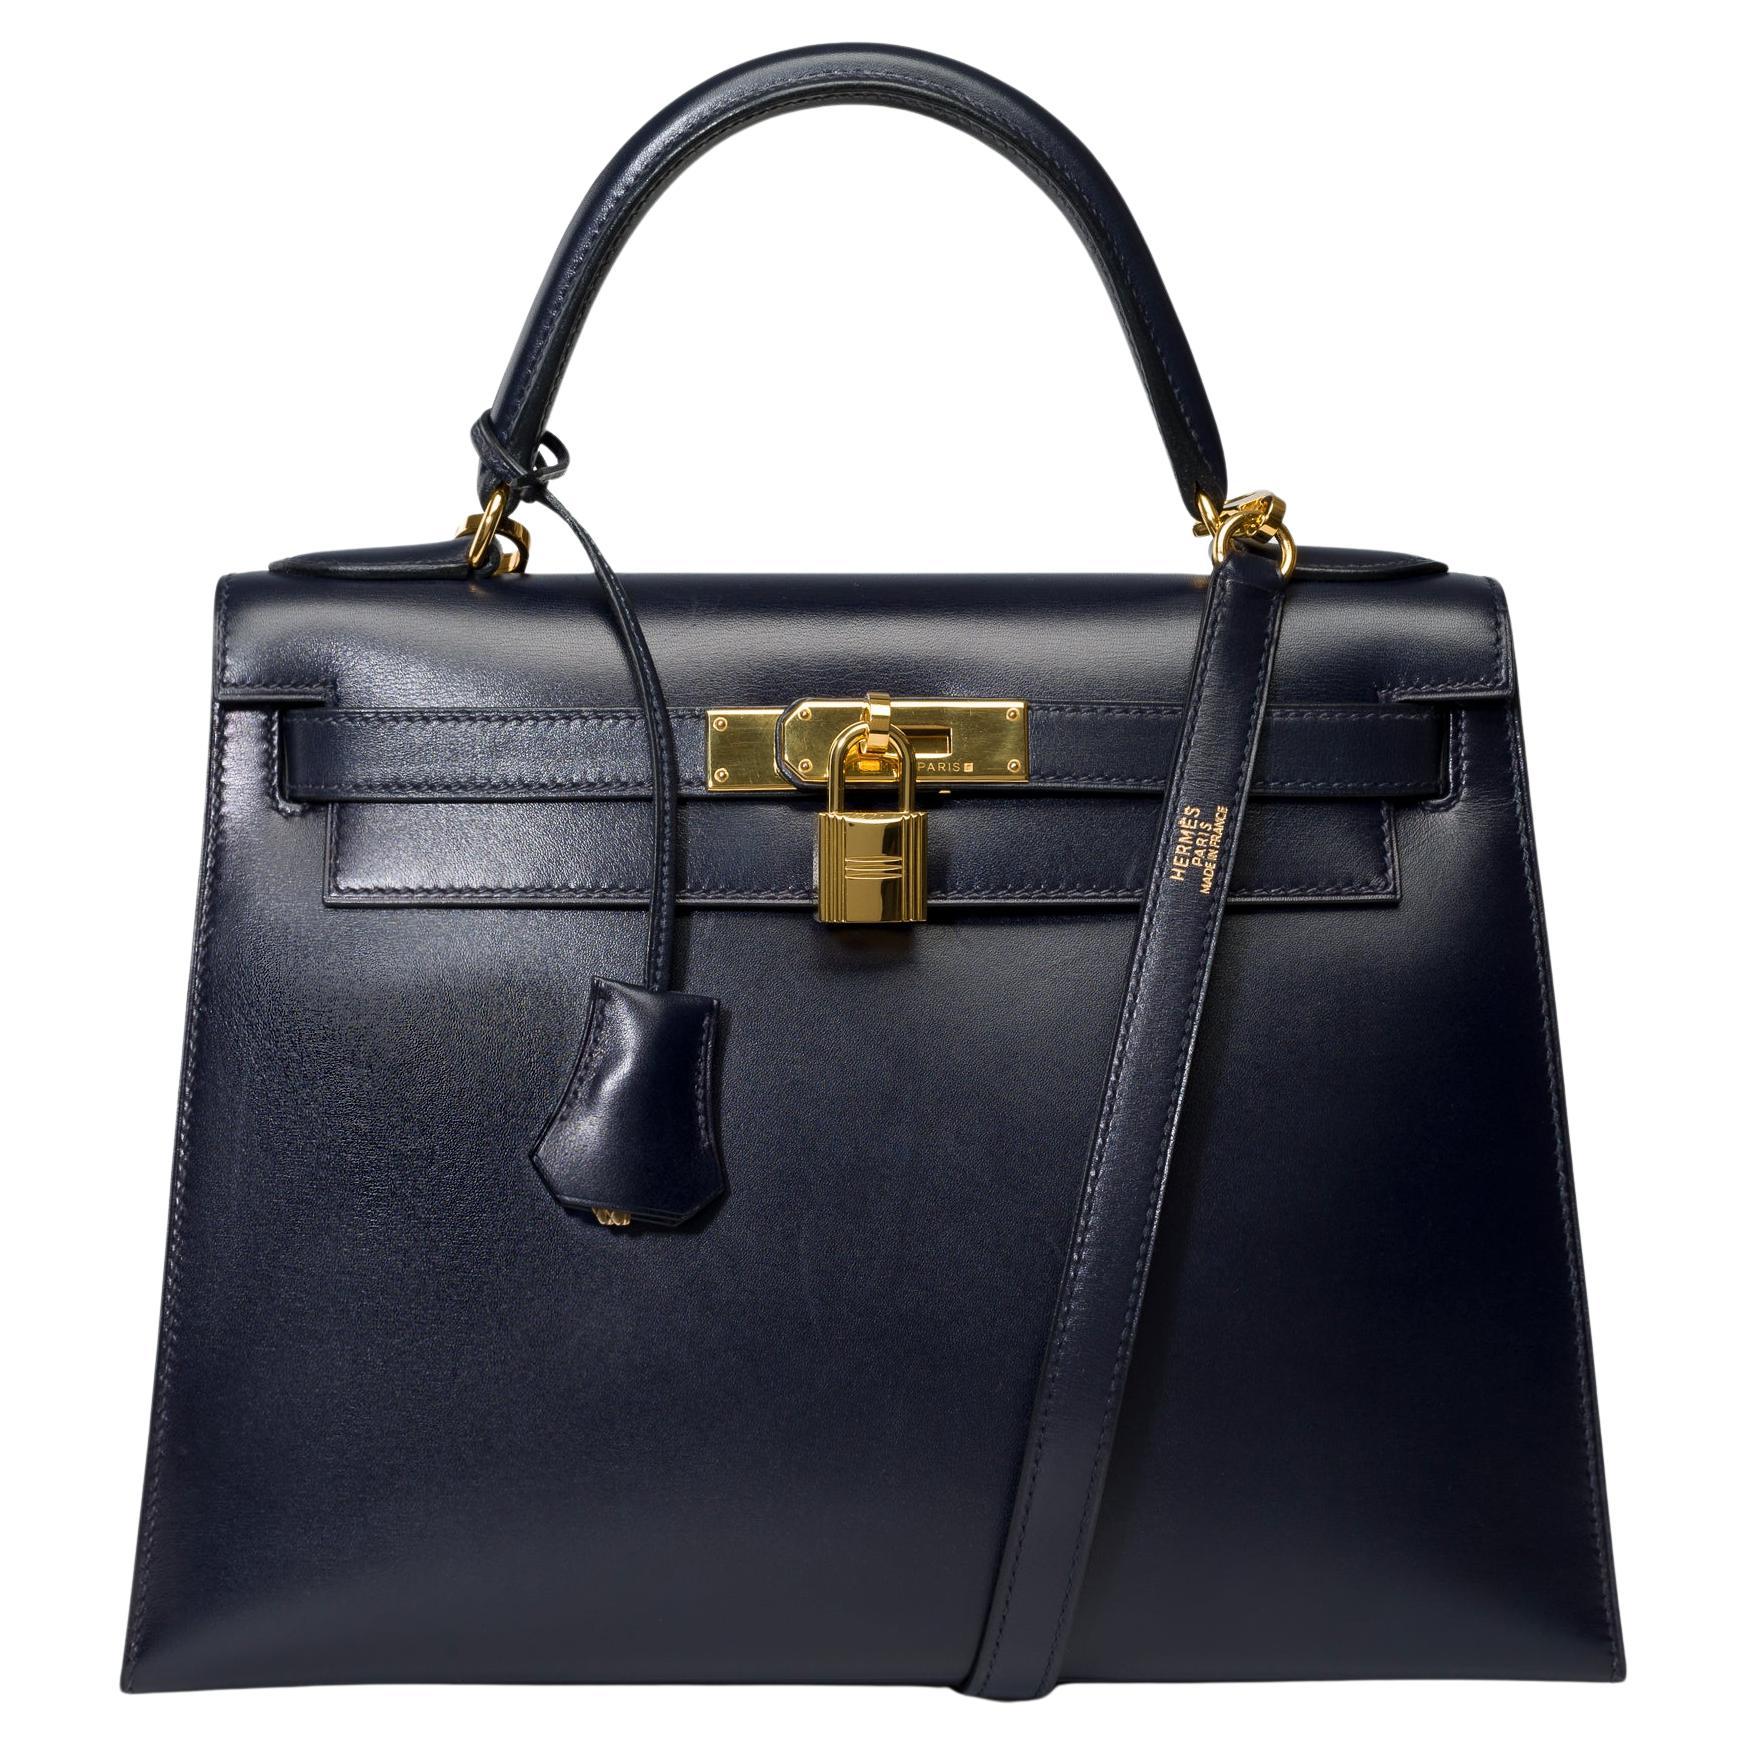 Beautiful​ ​Hermès​ ​Kelly​ ​28​ ​sellier​ ​handbag​ ​strap​ ​in​ ​Navy Blue ​box​ ​calfskin​ ​leather,​ ​gold​ ​plated​ ​metal​ ​hardware,​ ​removable​ ​navy blue​ ​box​ ​leather​ ​shoulder​ ​strap,​ ​navy blue​ ​box​ ​leather​ ​handle​ ​for​